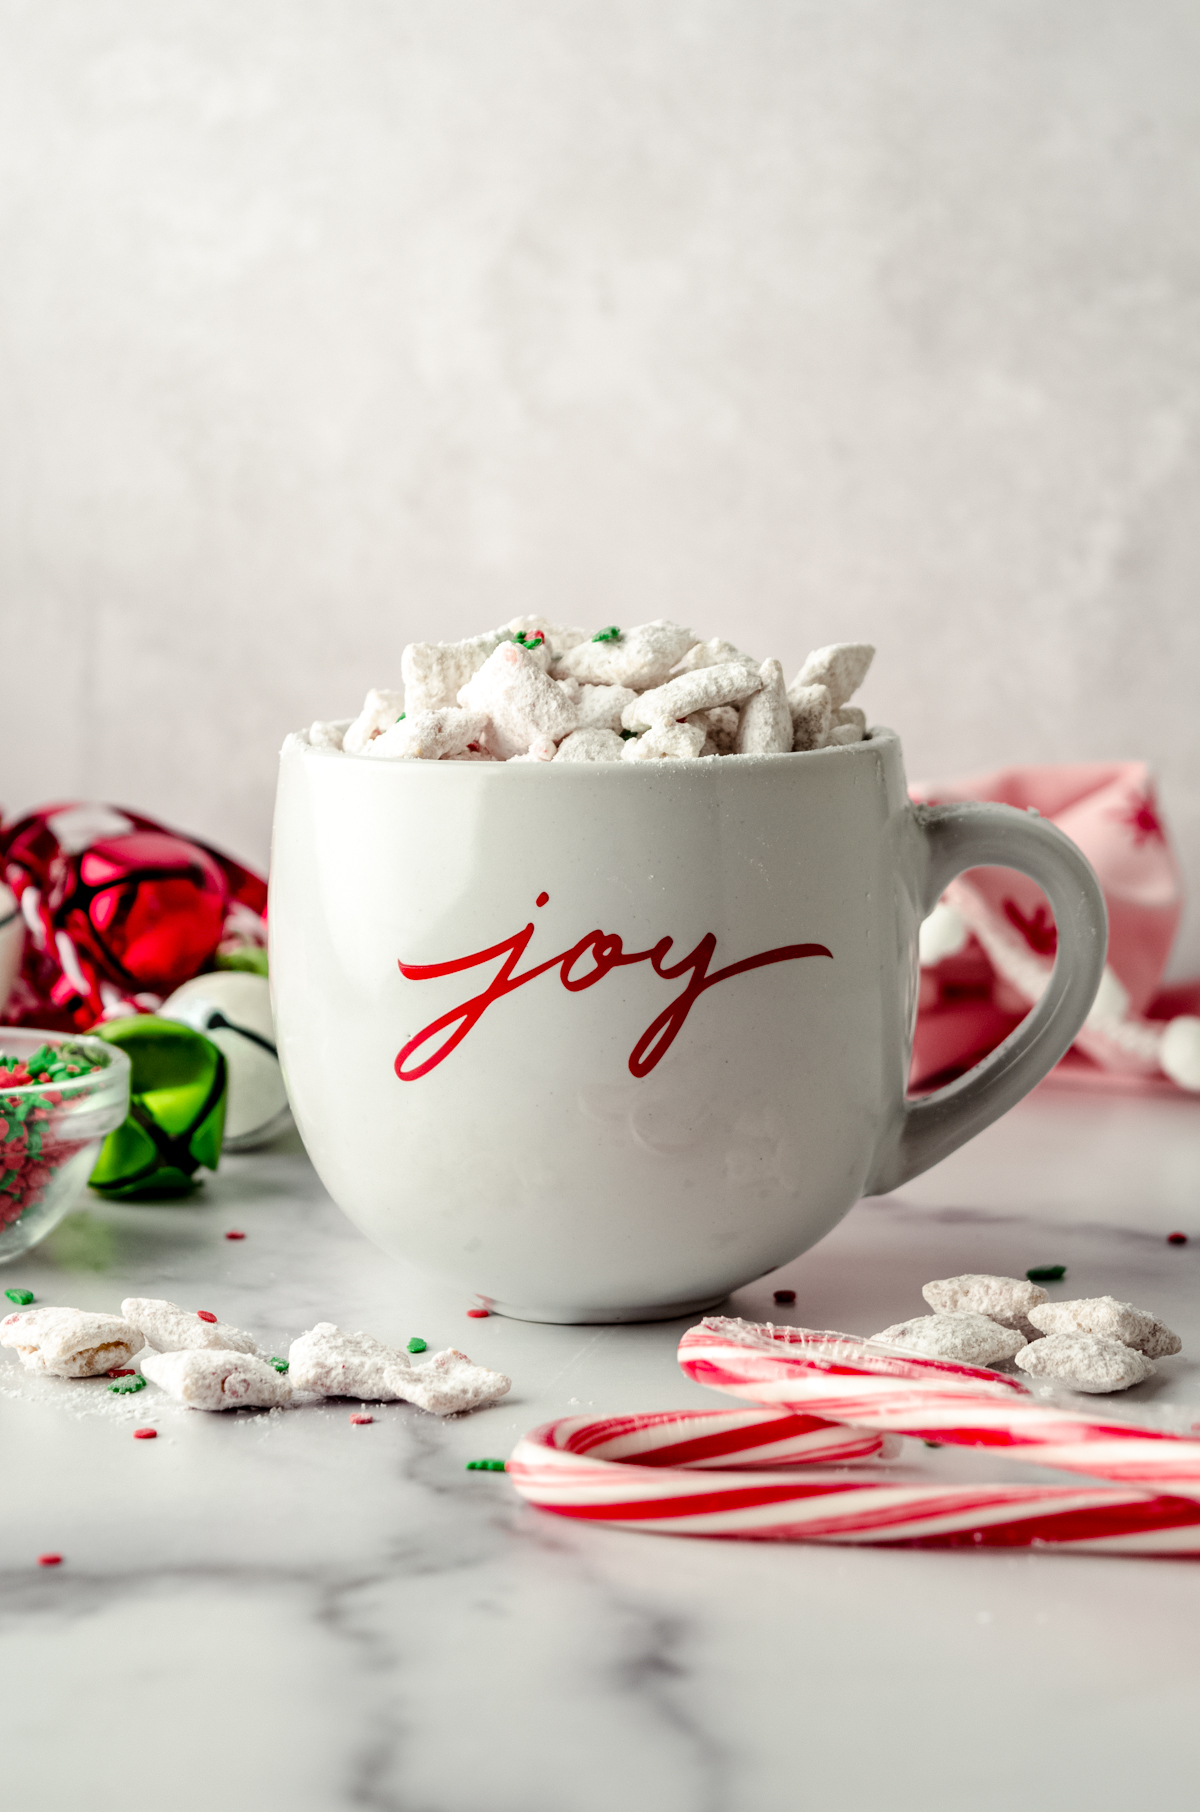 A white mug with "joy" written on it in red script with candy cane puppy chow in it with festive decor around it.